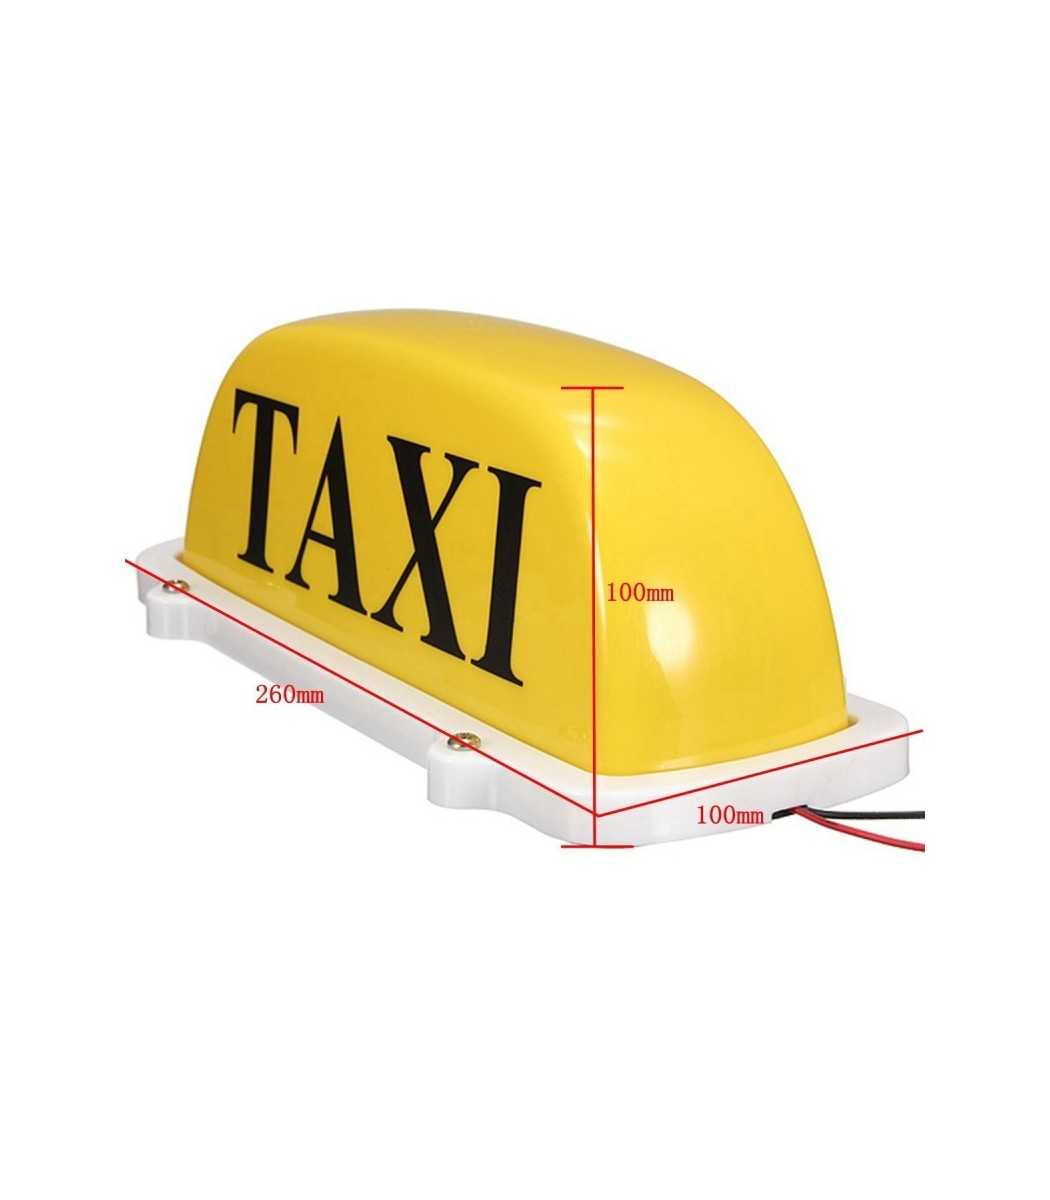 Taxi Light 12V LED Magnetic Taxi Sign On Auto Roof Super Bright Lampe mit  Zigarettenanzünder (Gelbes Gehäuse: weißes Licht)